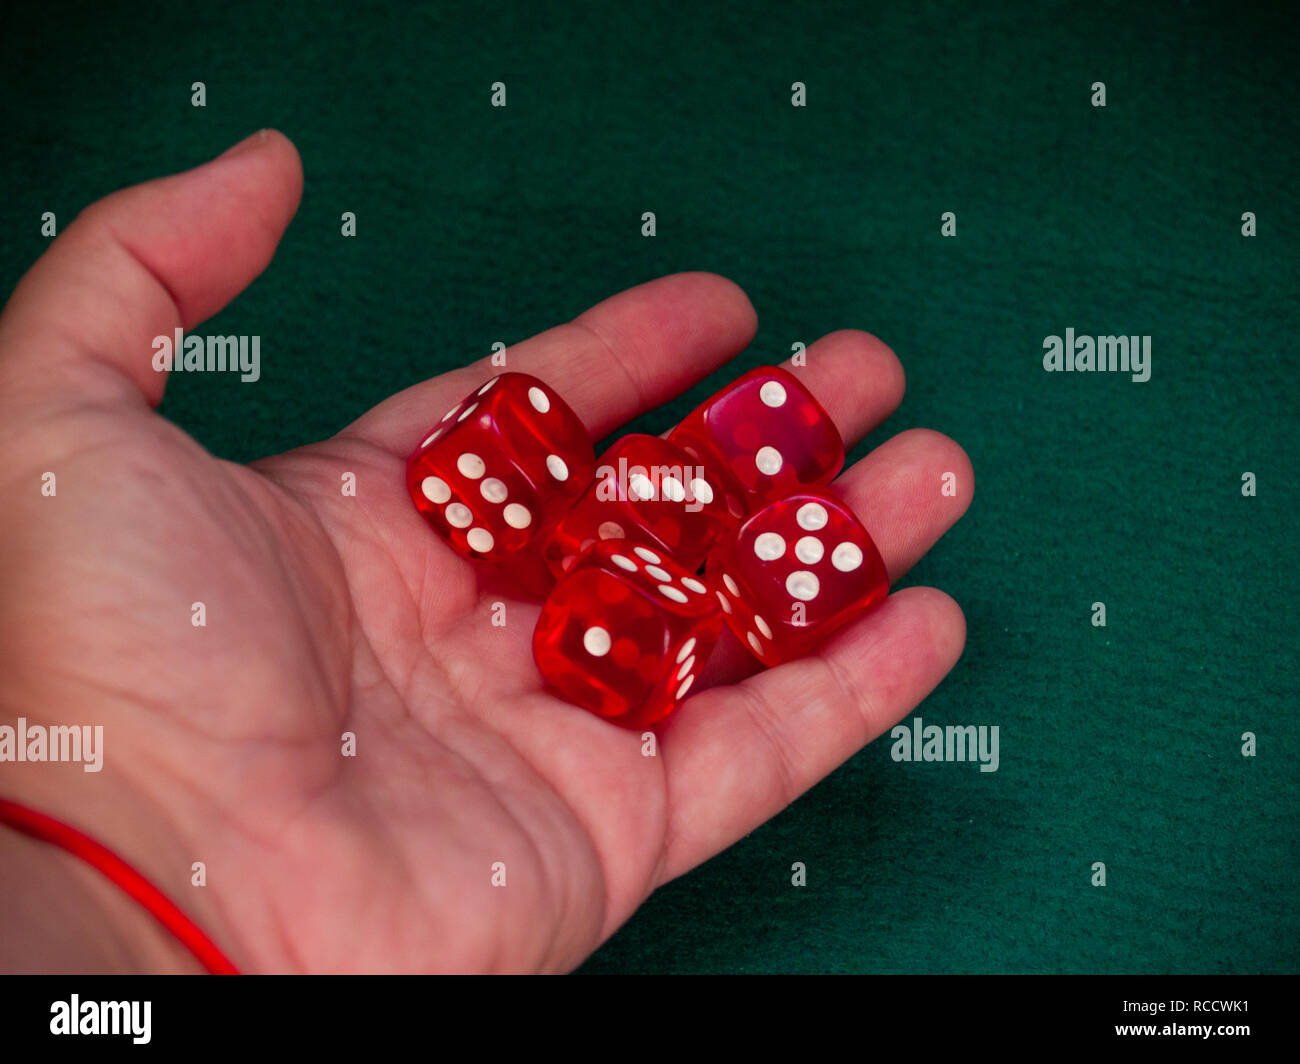 The hand of a person throwing the dice on a green carpet Stock Photo